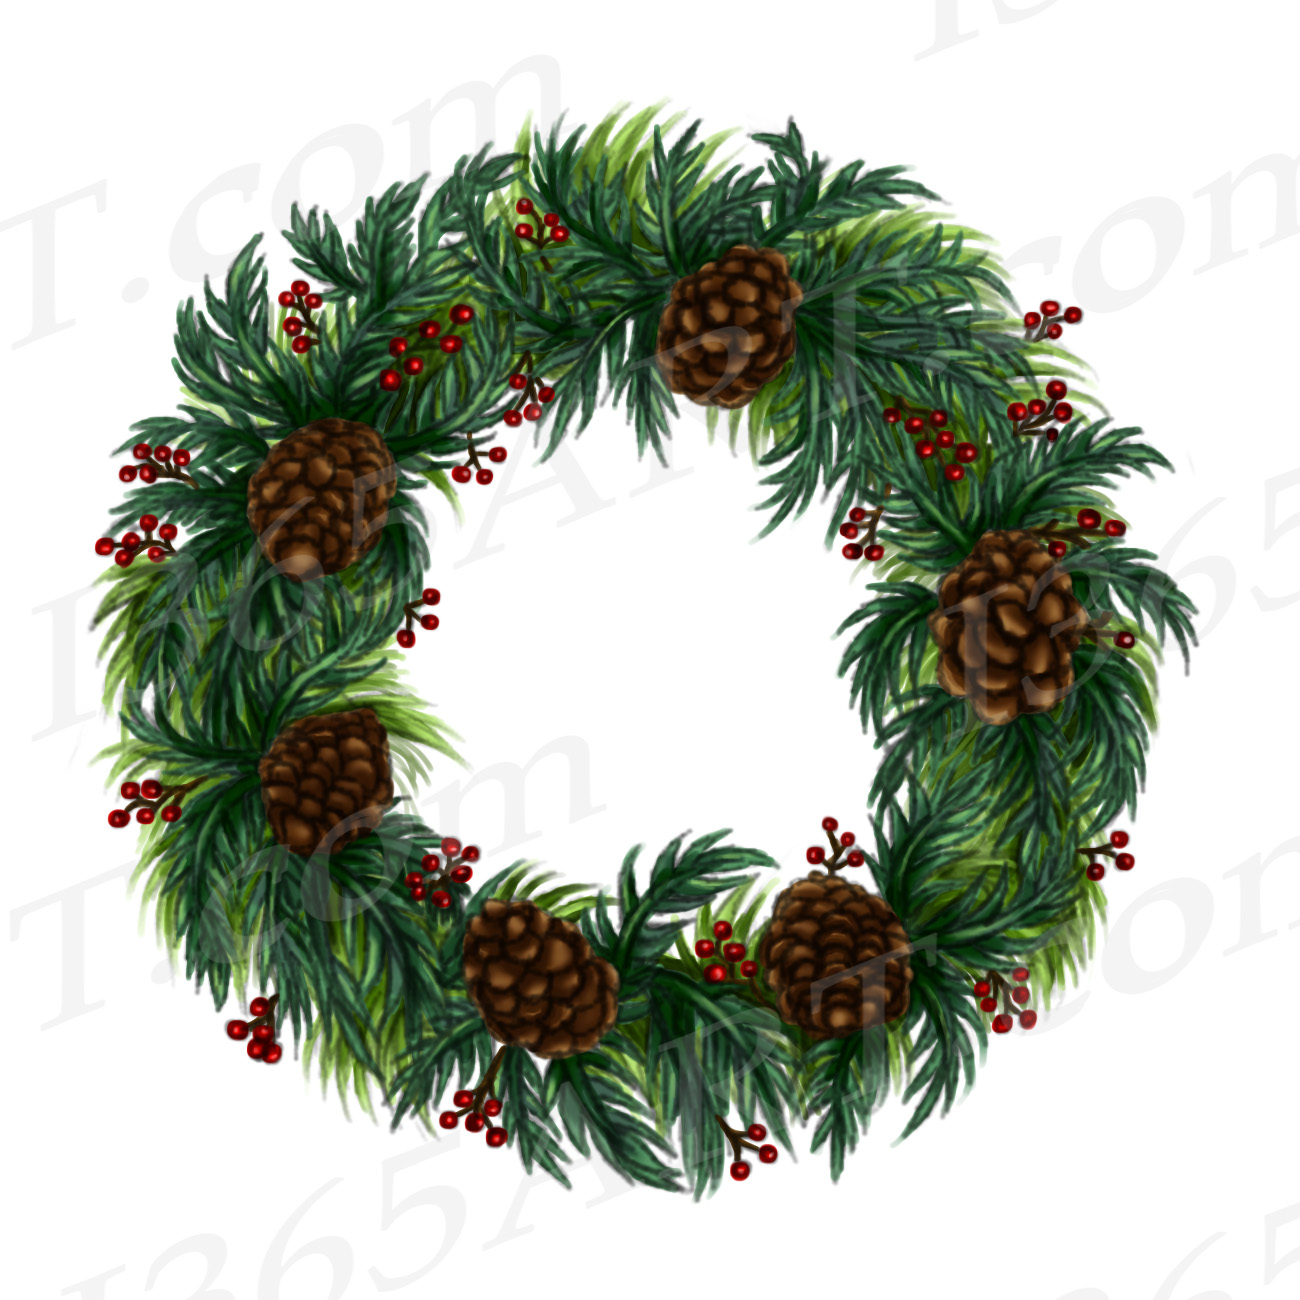 pine wreath with pine cones and berries